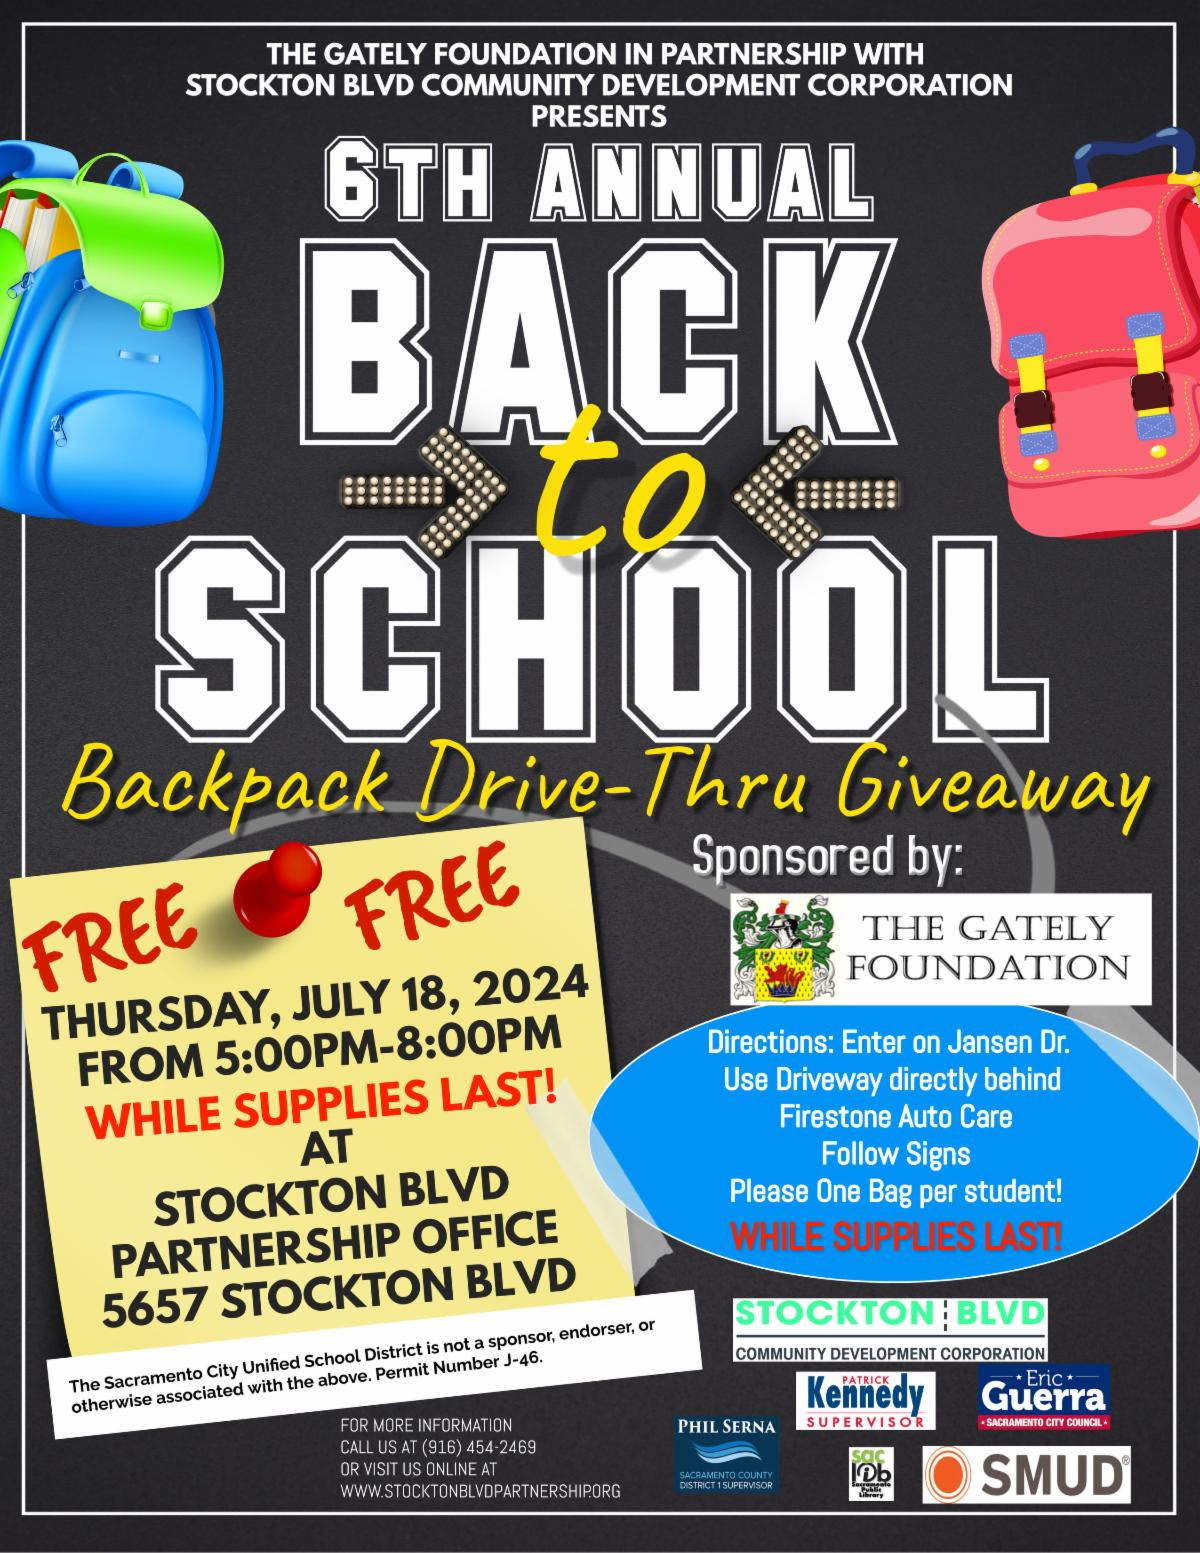 6th Annual Back To School Backpack Drive-Thru Give-A-Way